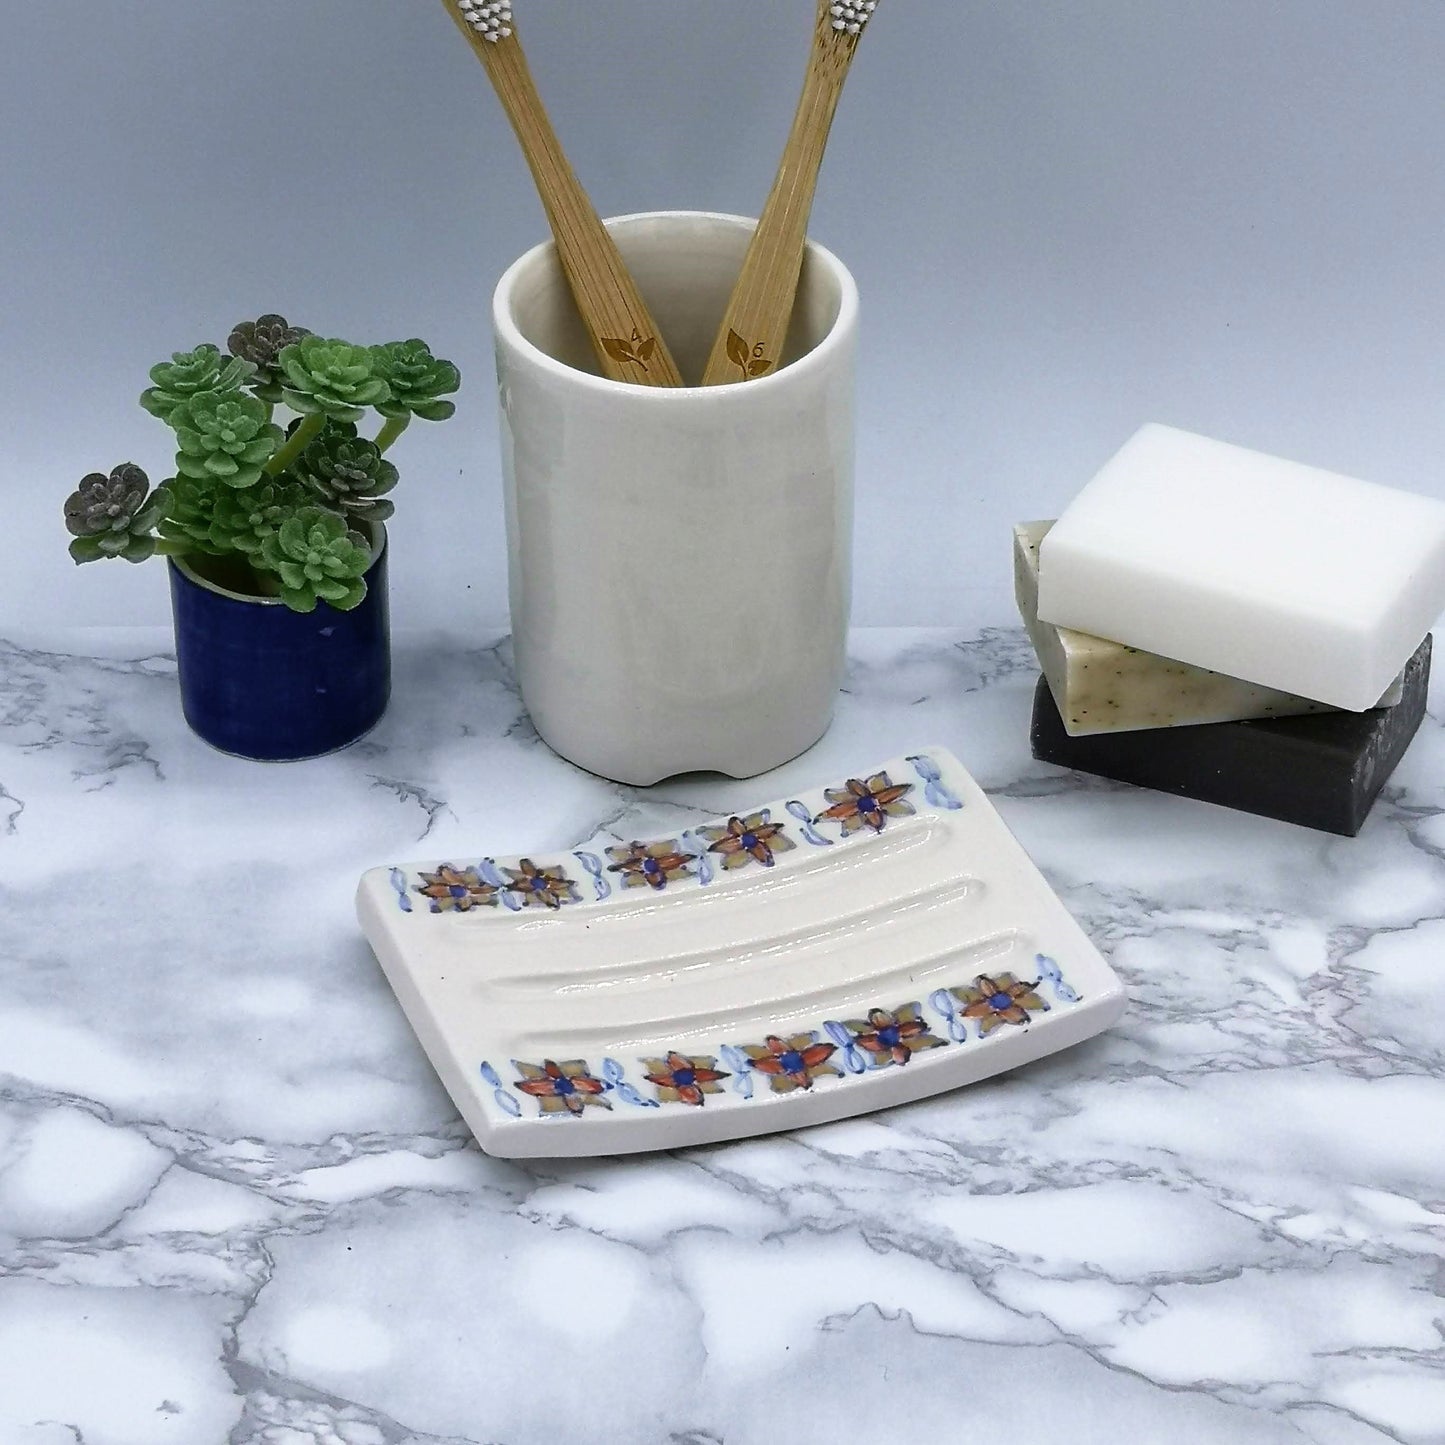 Floral Soap Bar Holder with drain, ceramic soap dish rectangular, sustainable gifts for men, eco friendly products - Ceramica Ana Rafael